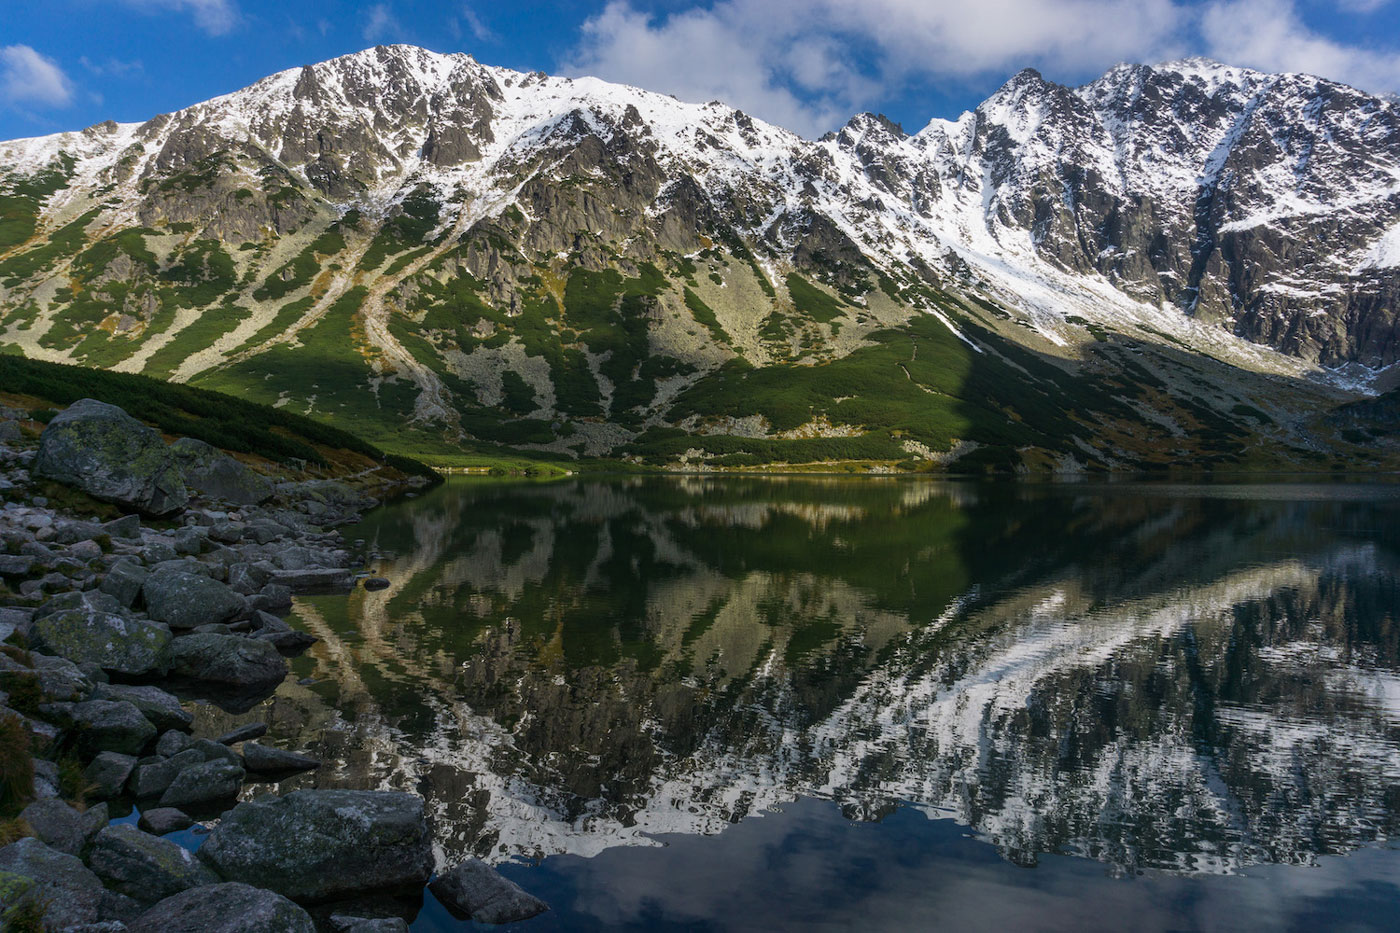 Mountains in Tatra National Park. Image: Barnyz under a CC license